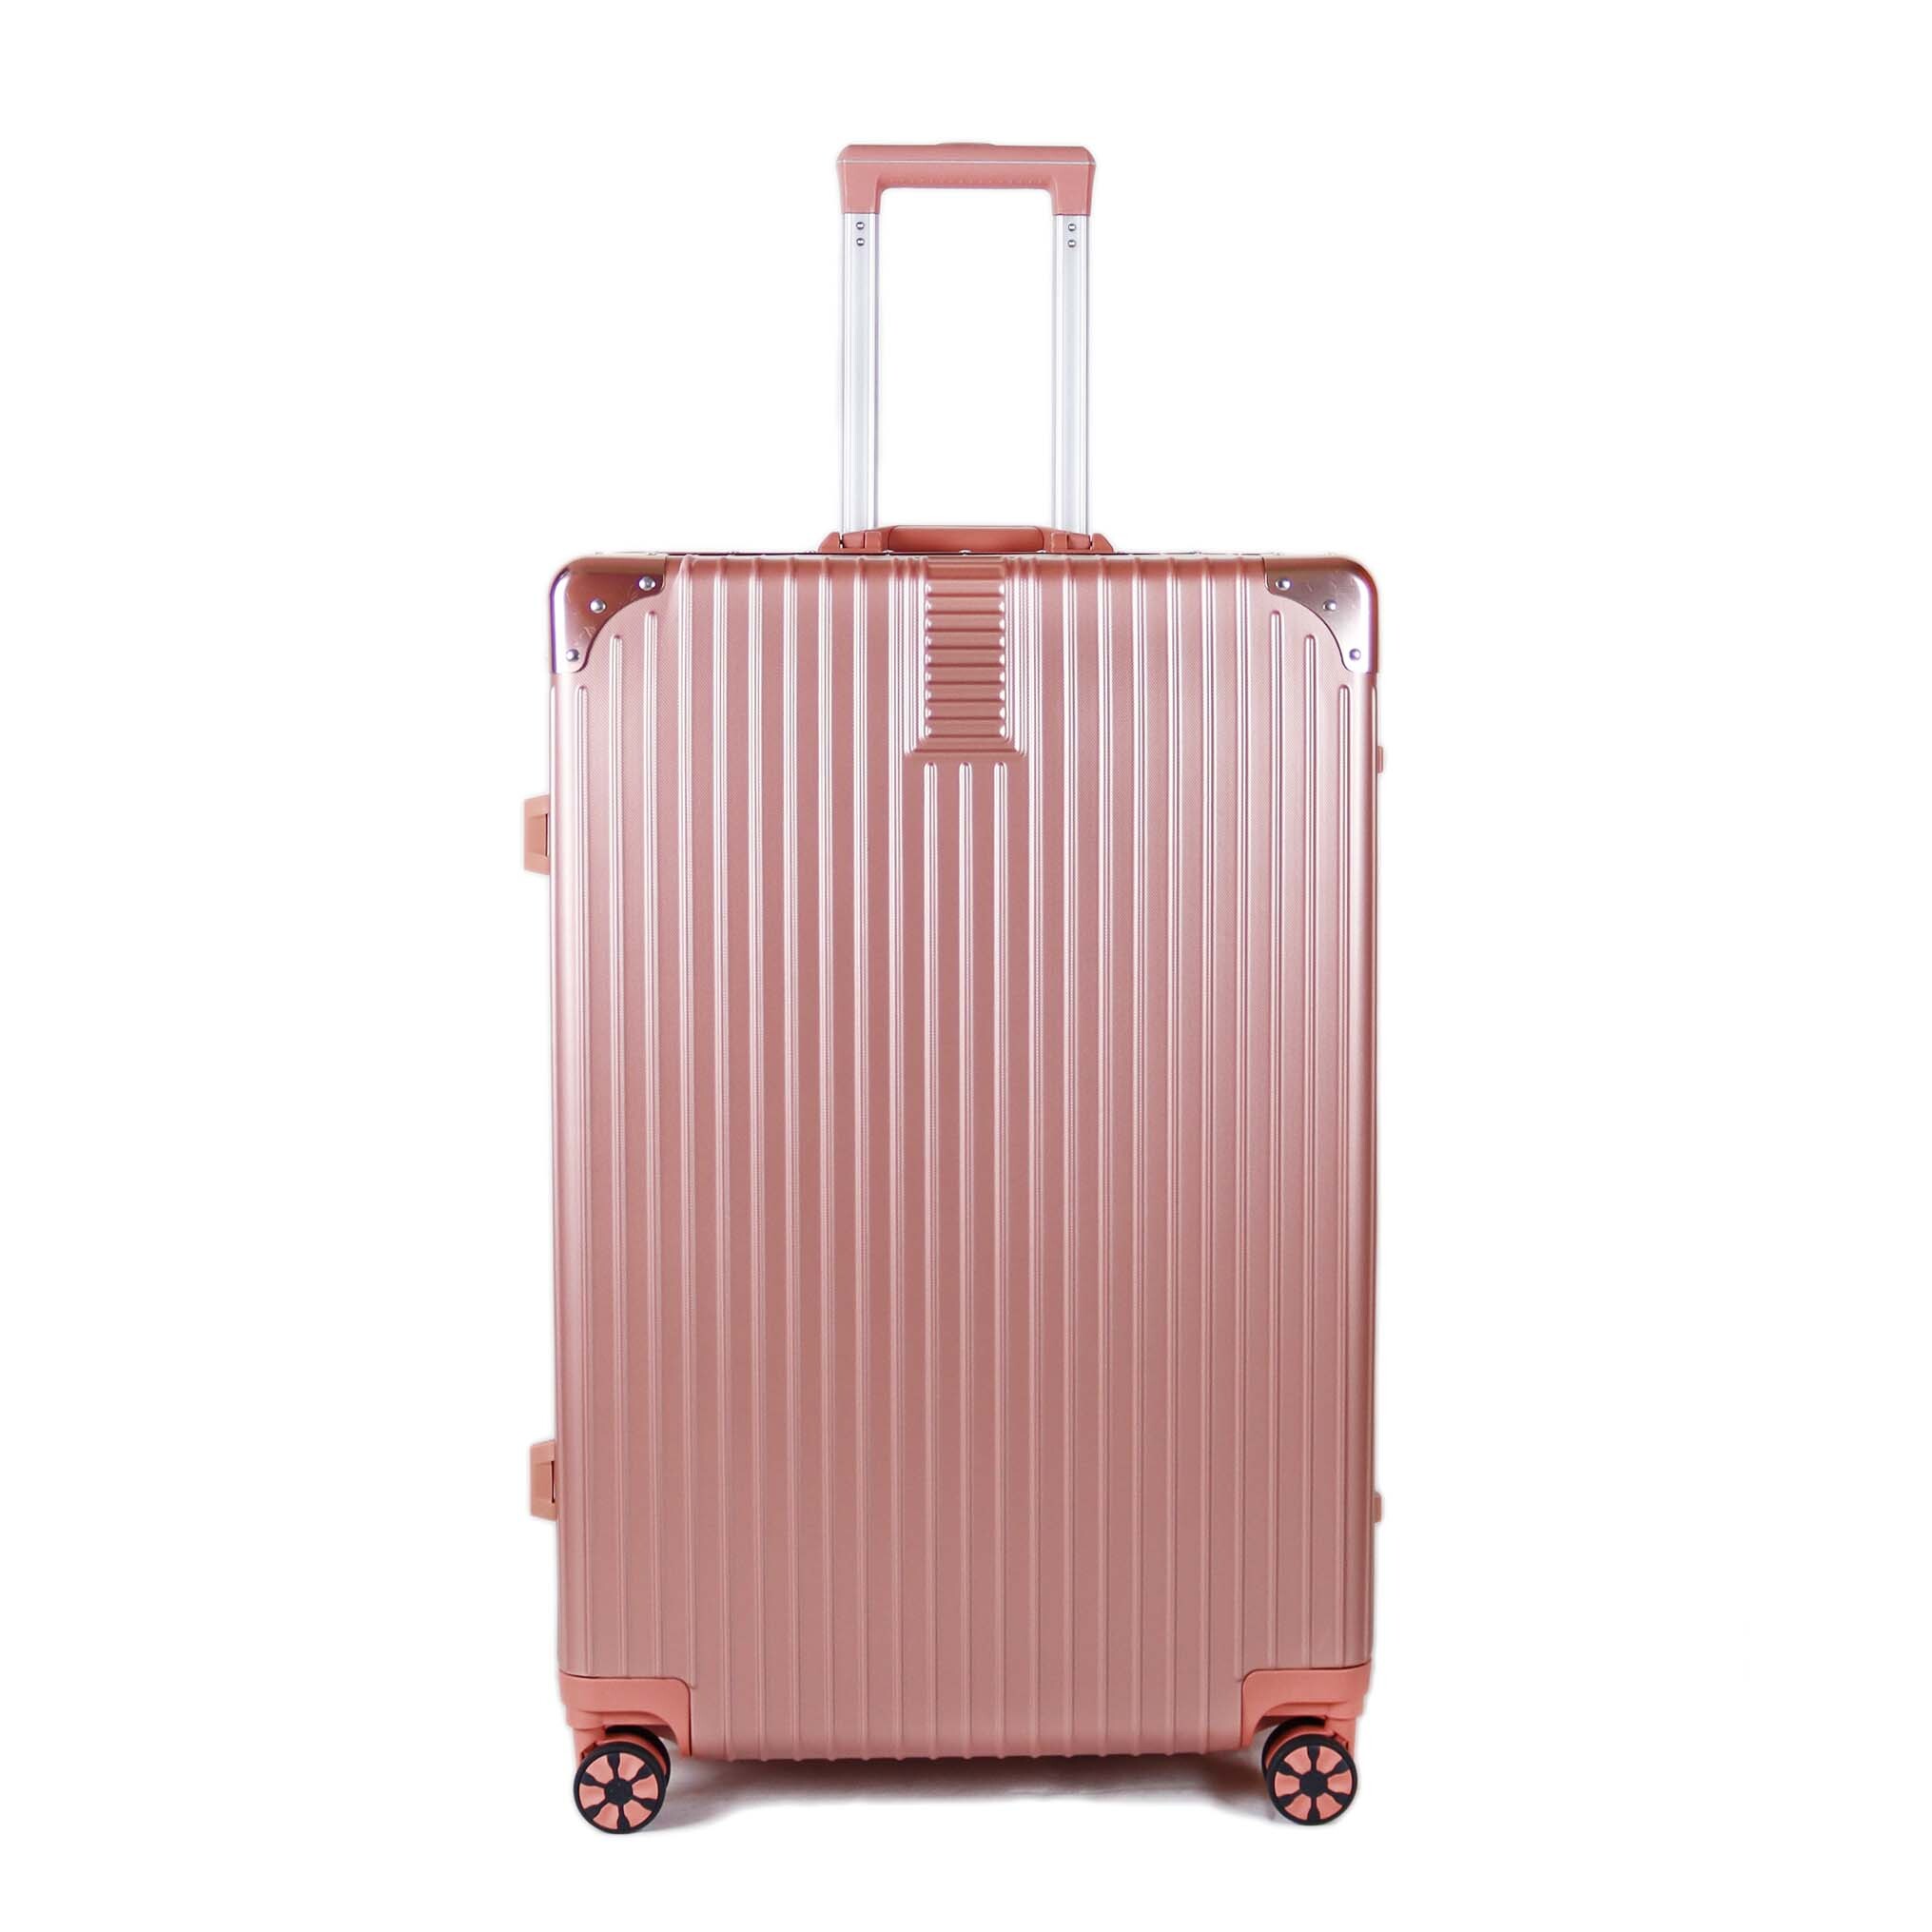 LUGGAGE DISTRICT ALUMINUM FRAME ULTRA-LIGHT CARRY-ON SMALL BAG 20INCH, ROSE GOLD